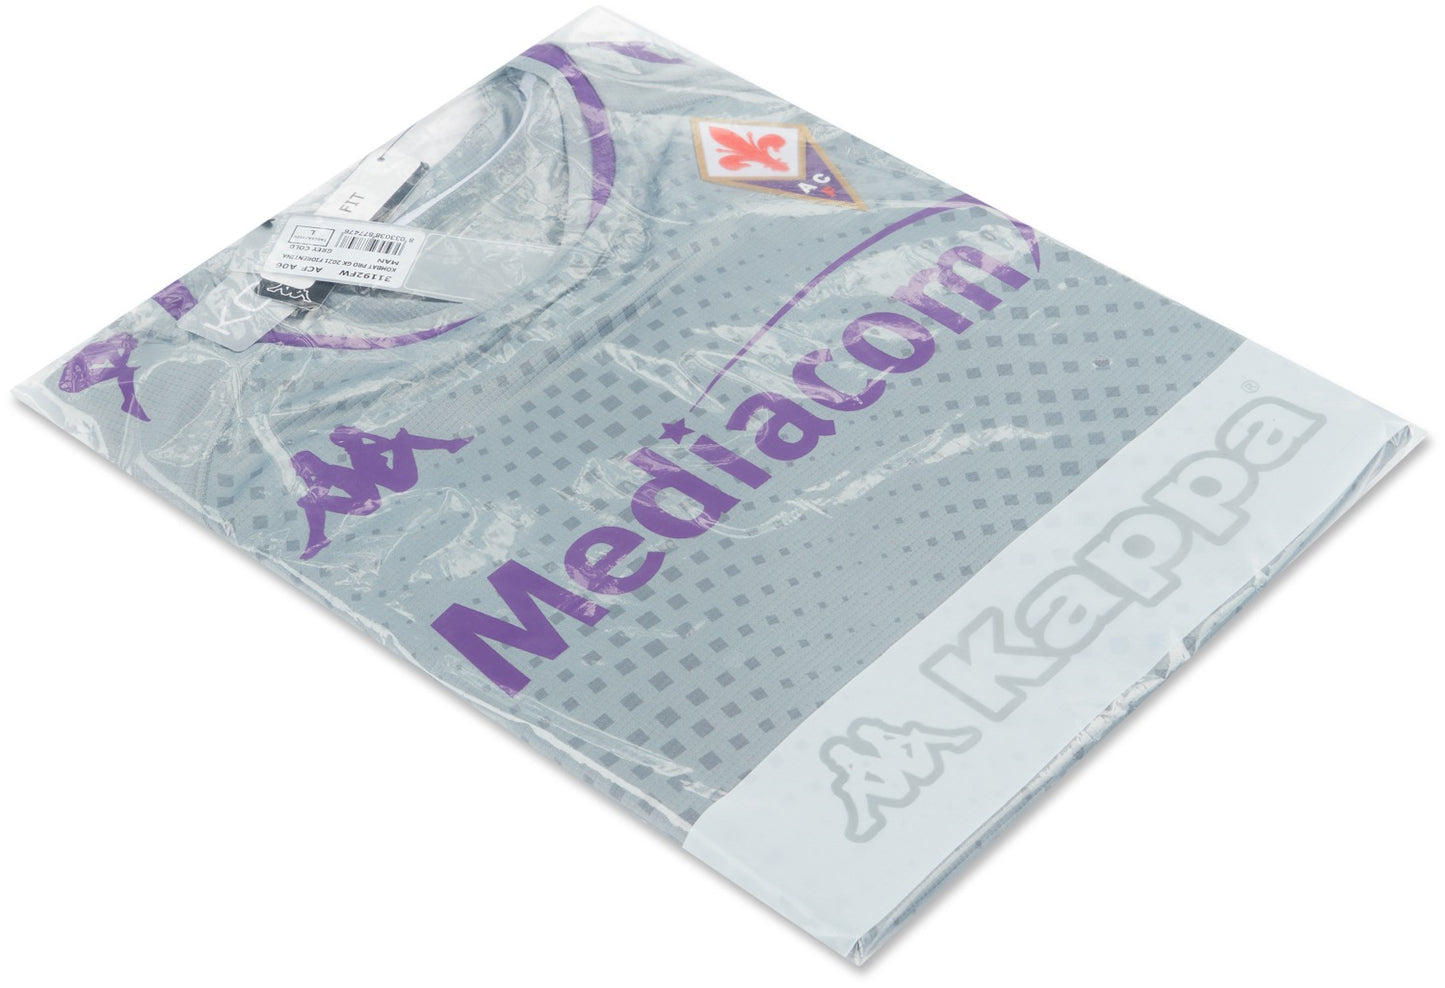 Maillot Fiorentina GK 2020-21 (GAMME PRO) RR STORE ONLINE